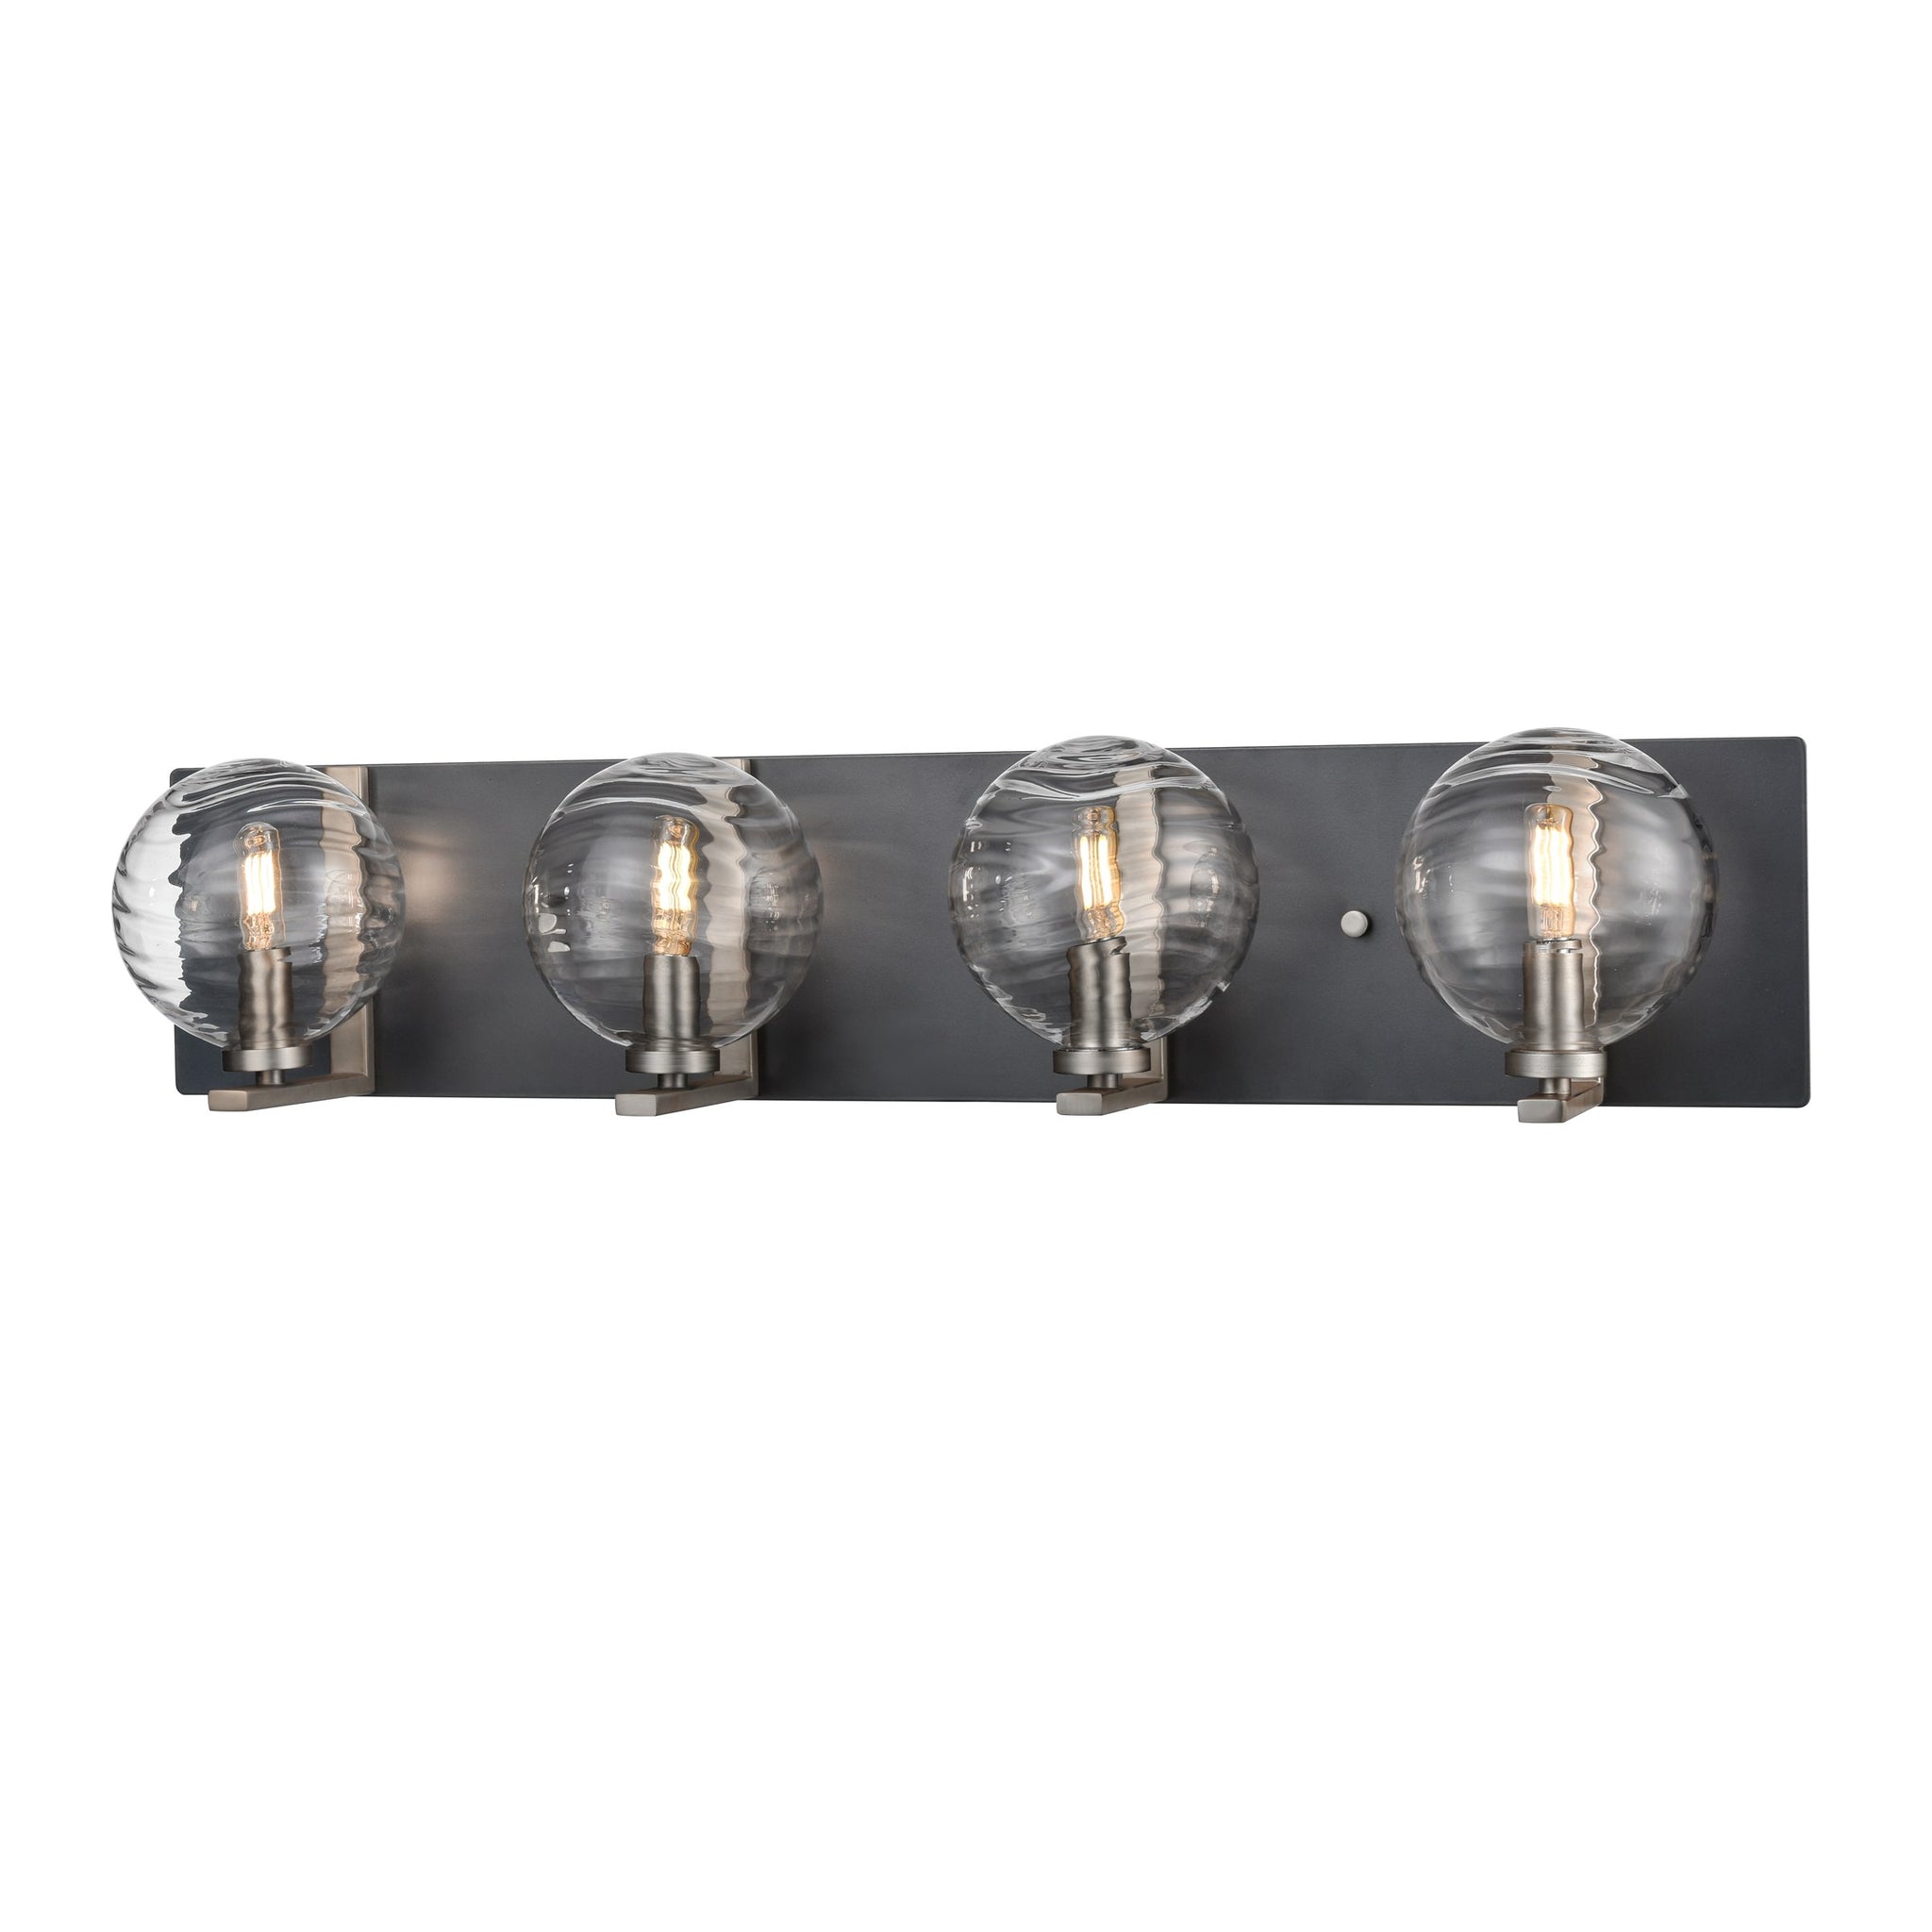 Tropea Vanity Light Satin Nickel and Graphite with Ripple Glass